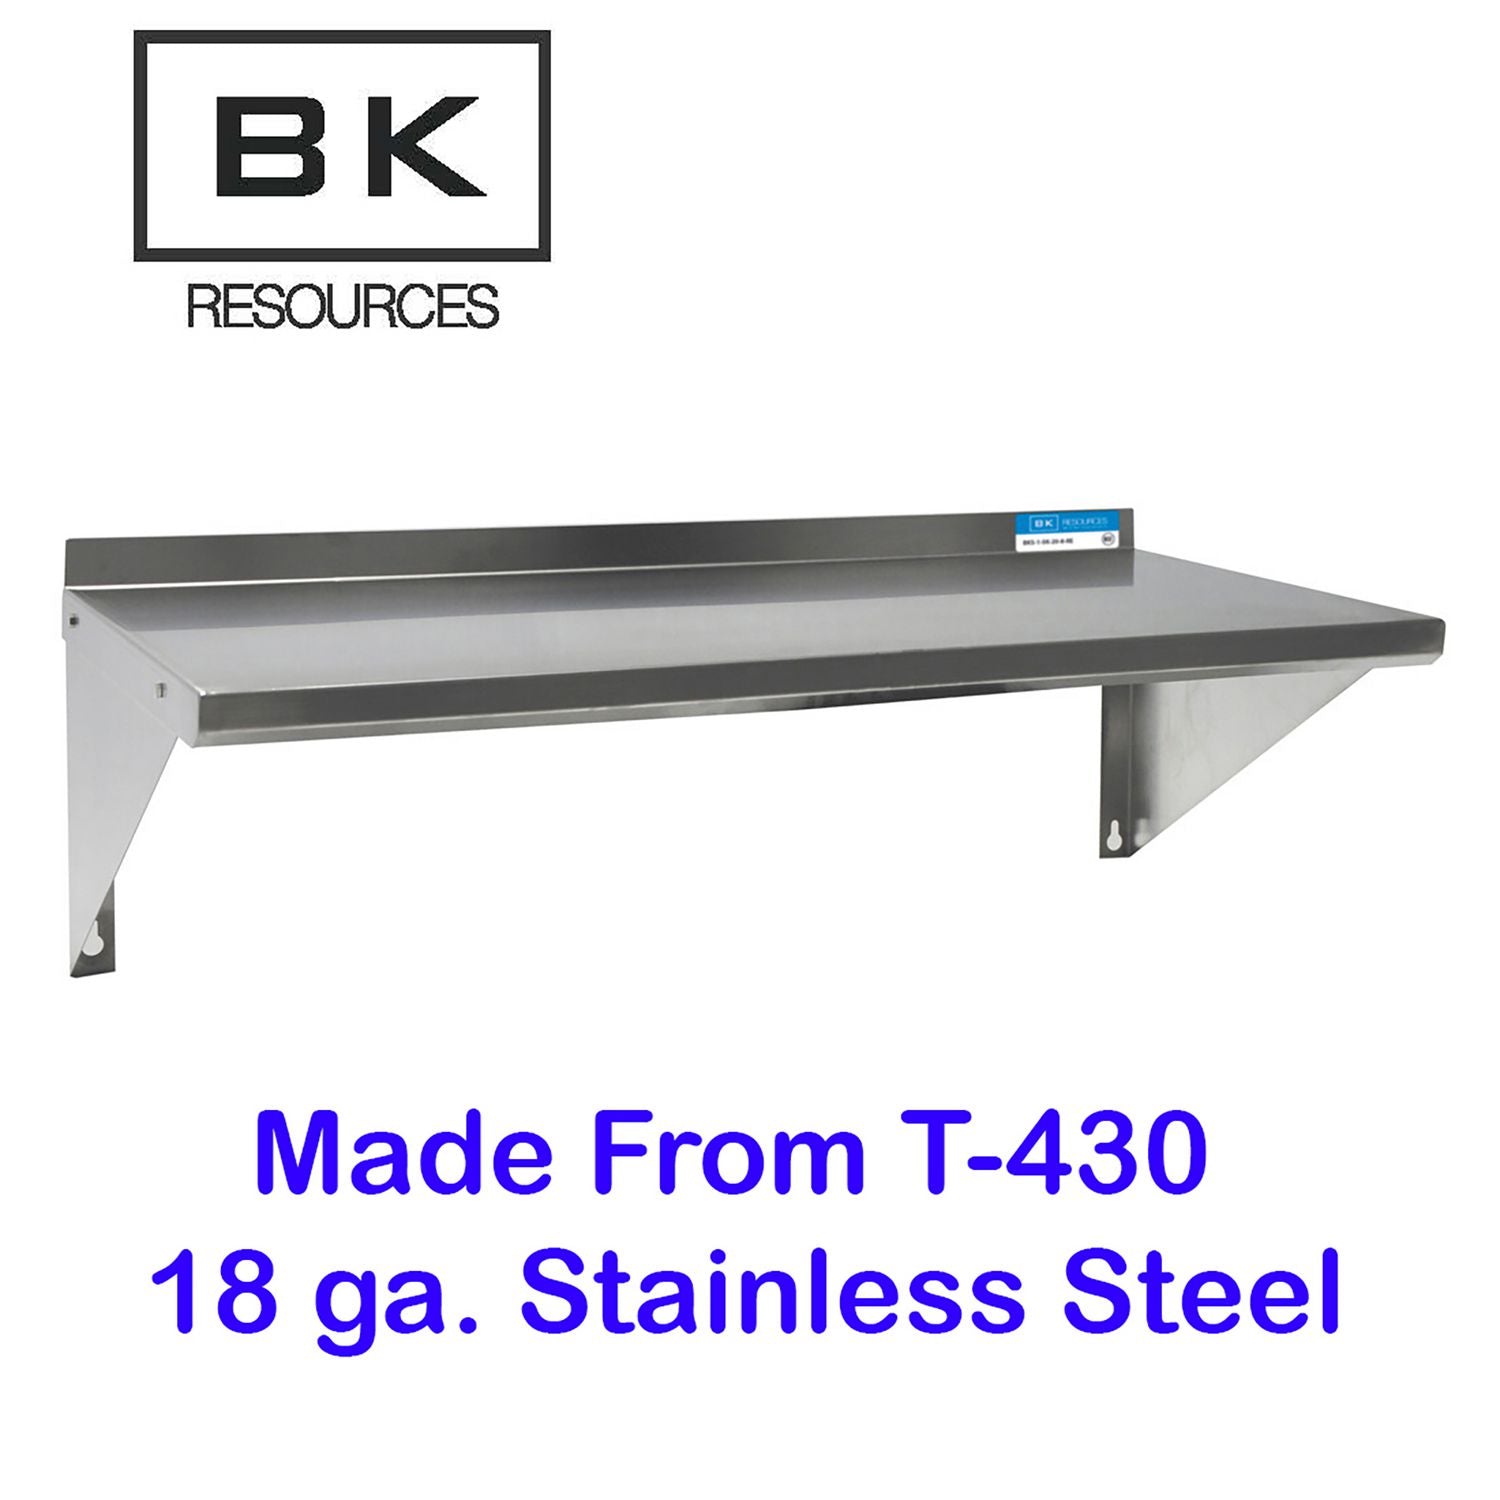 stainless-steel-economy-overshelf-24w-x-12d-x-8h-stainless-steel-silver-2-pallet-ships-in-4-6-business-days_bke2wse1224 - 3